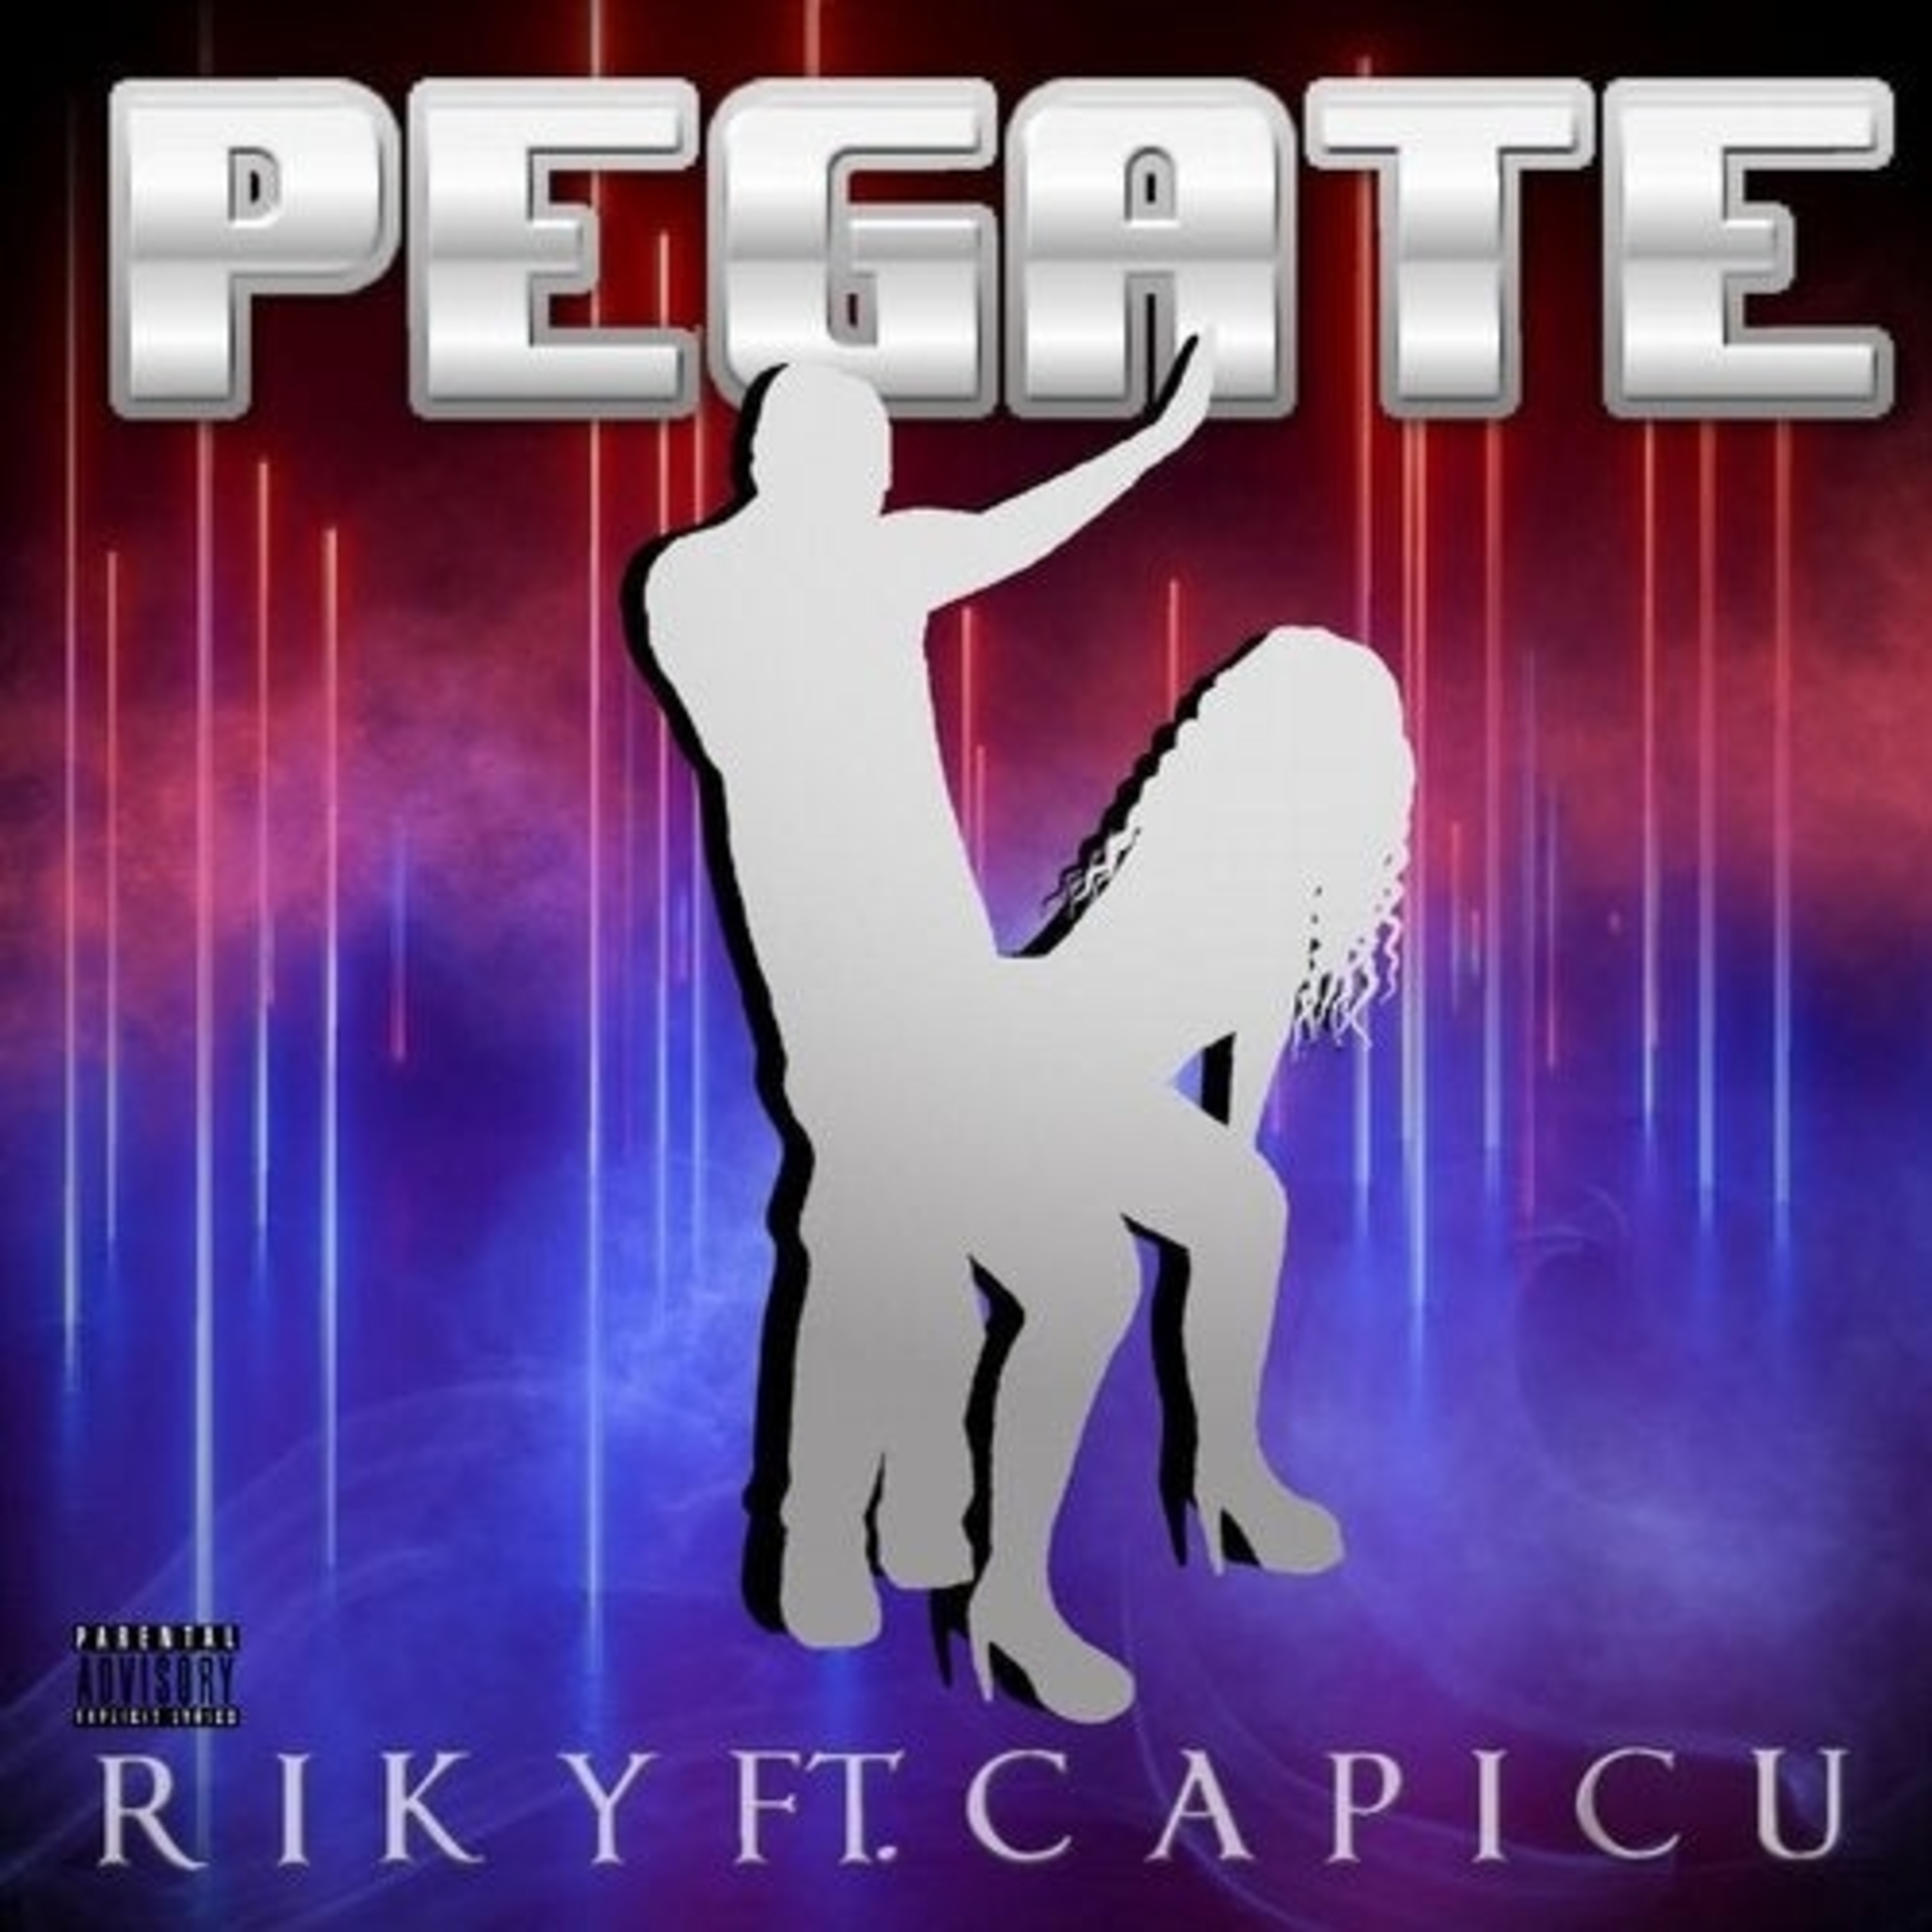 Art for Pegate by RikyKash [feat. Capicu]